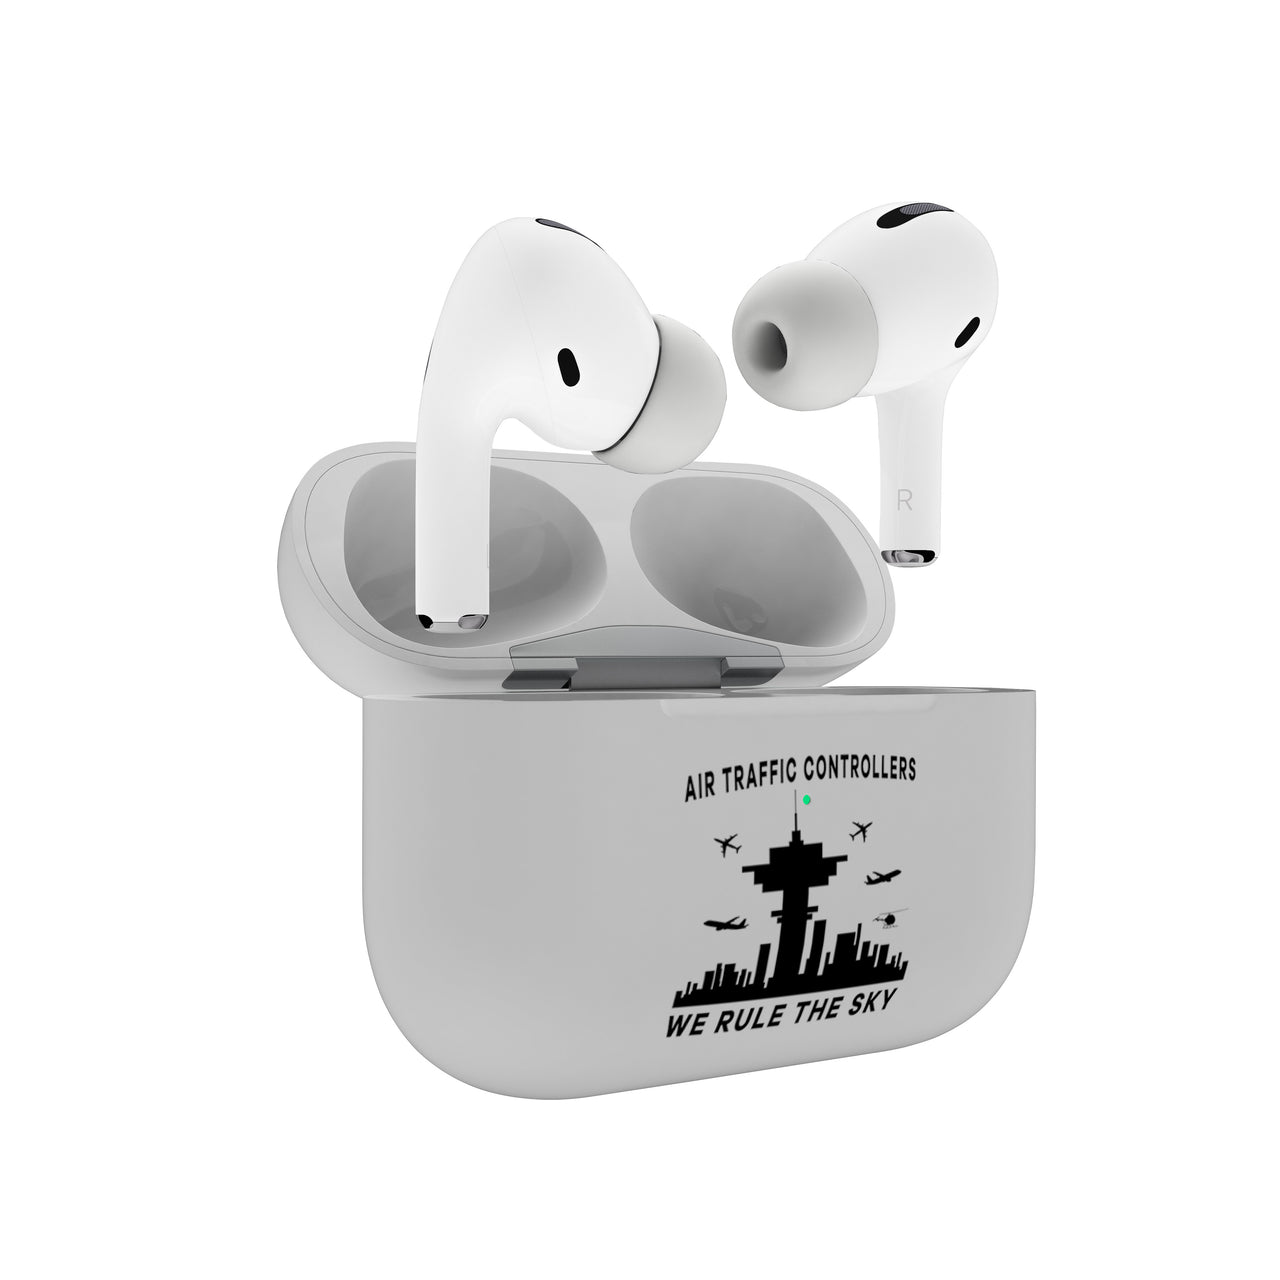 Air Traffic Controllers - We Rule The Sky Designed AirPods "Pro" Cases